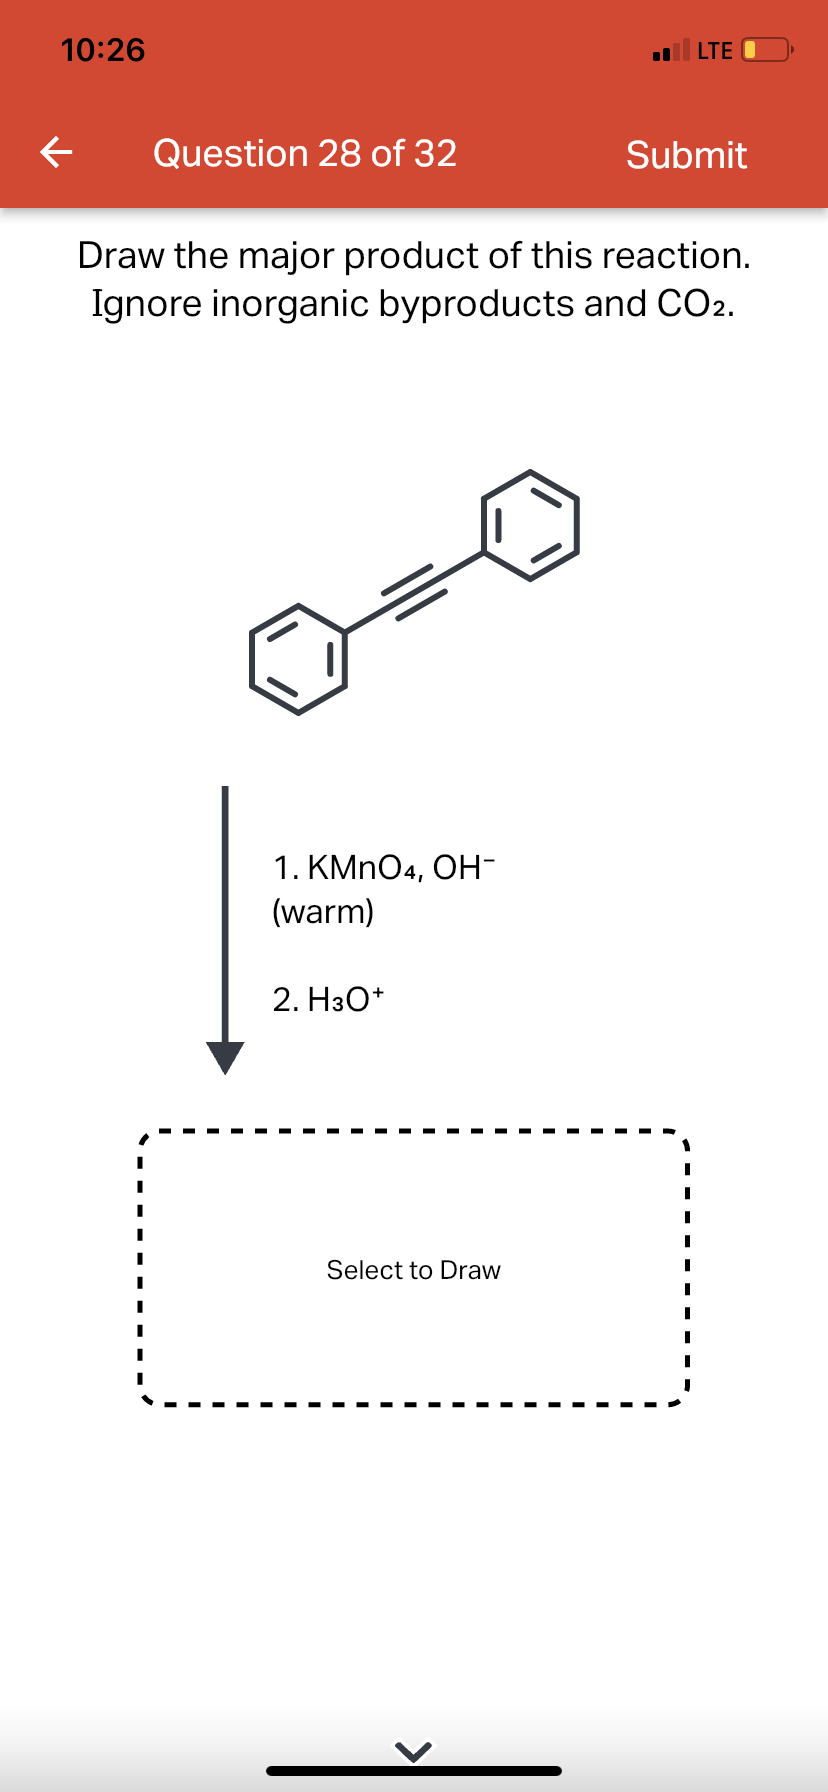 10:26
← Question 28 of 32
1. KMnO4, OH-
(warm)
Draw the major product of this reaction.
Ignore inorganic byproducts and CO2.
2. H3O+
LTE
Select to Draw
Submit